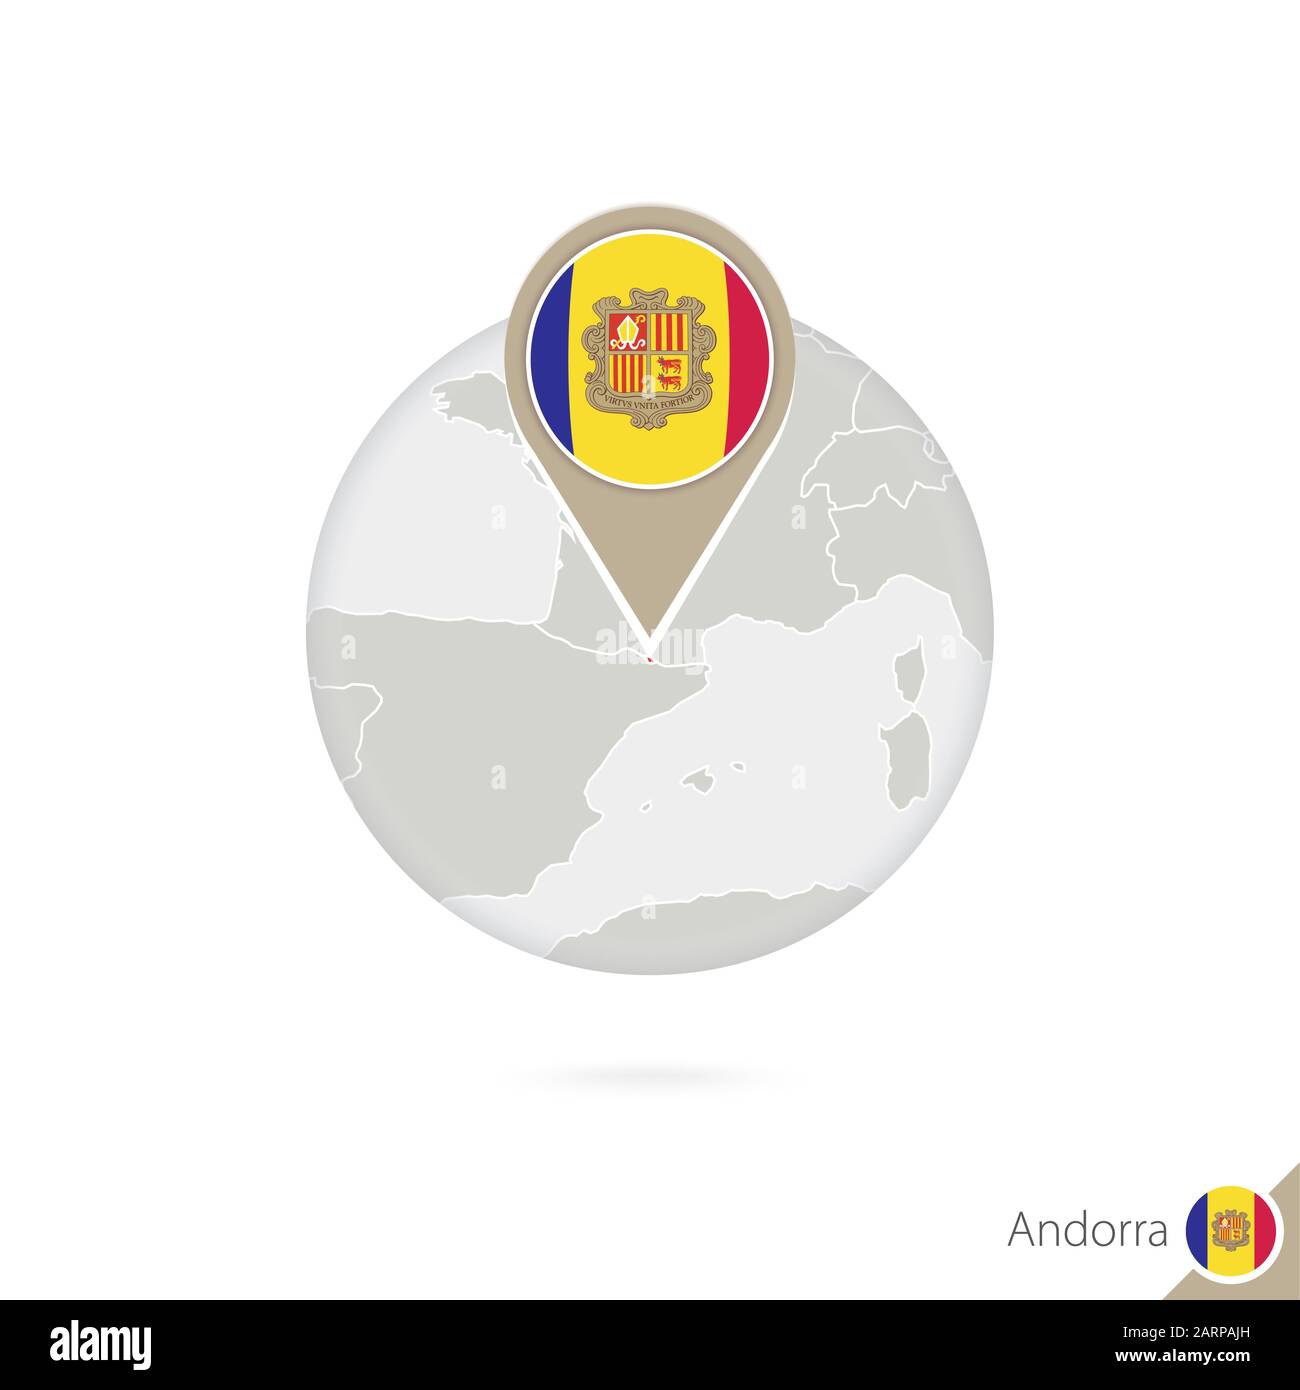 Andorra map and flag in circle. Map of Andorra, Andorra flag pin. Map of Andorra in the style of the globe. Vector Illustration. Stock Vector